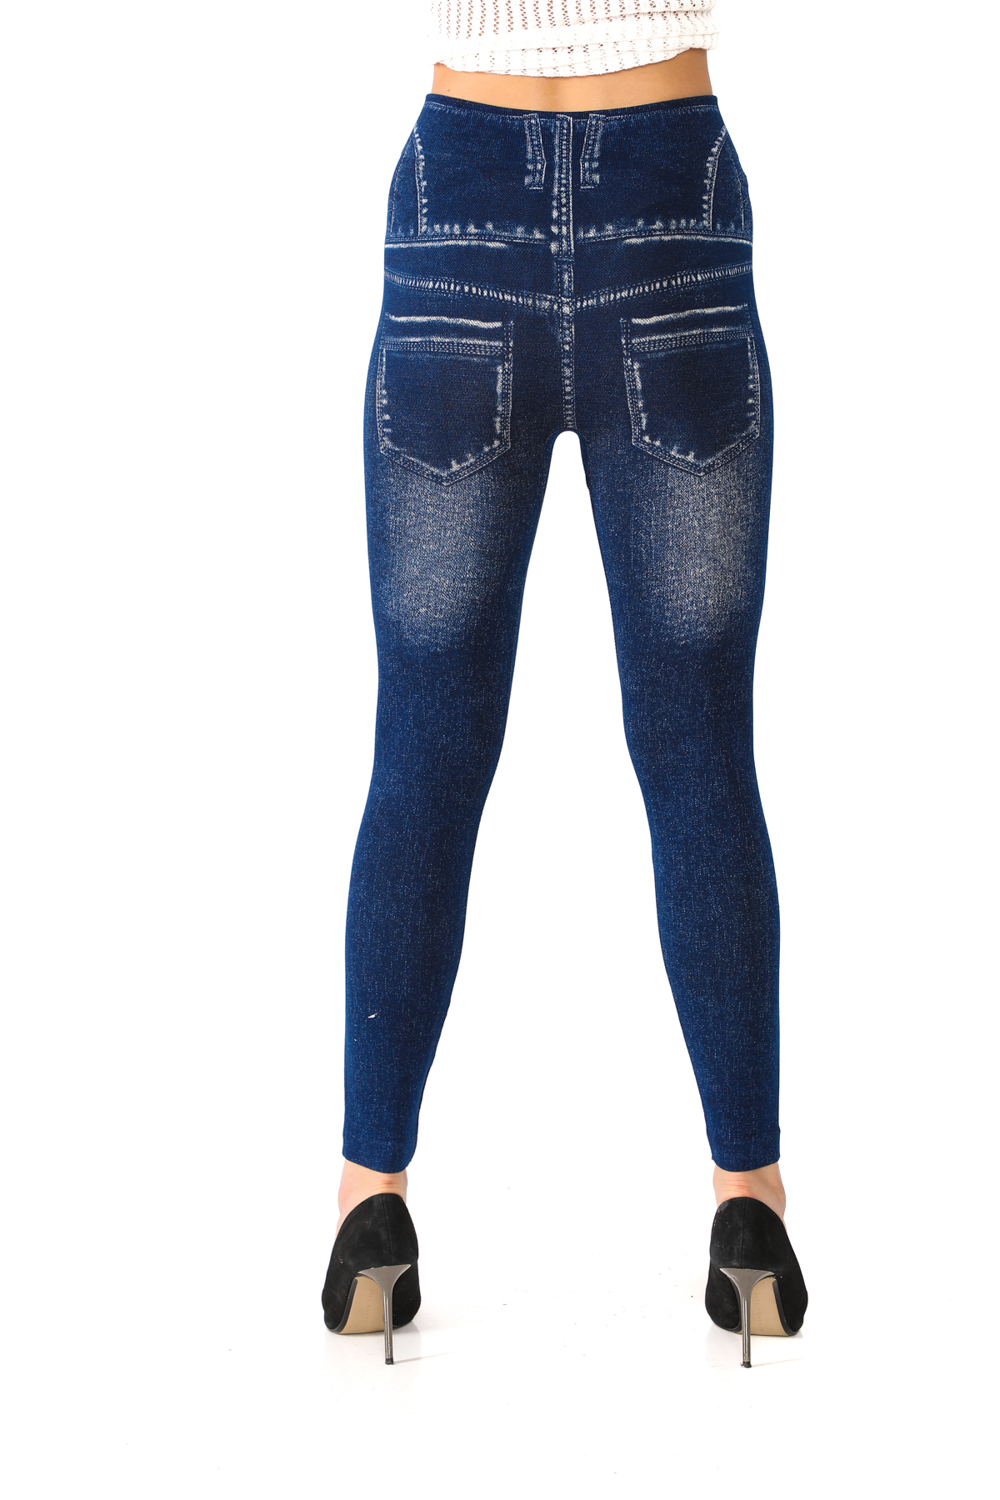 Denim Leggings with Fake Pockets and Button Pattern - 3